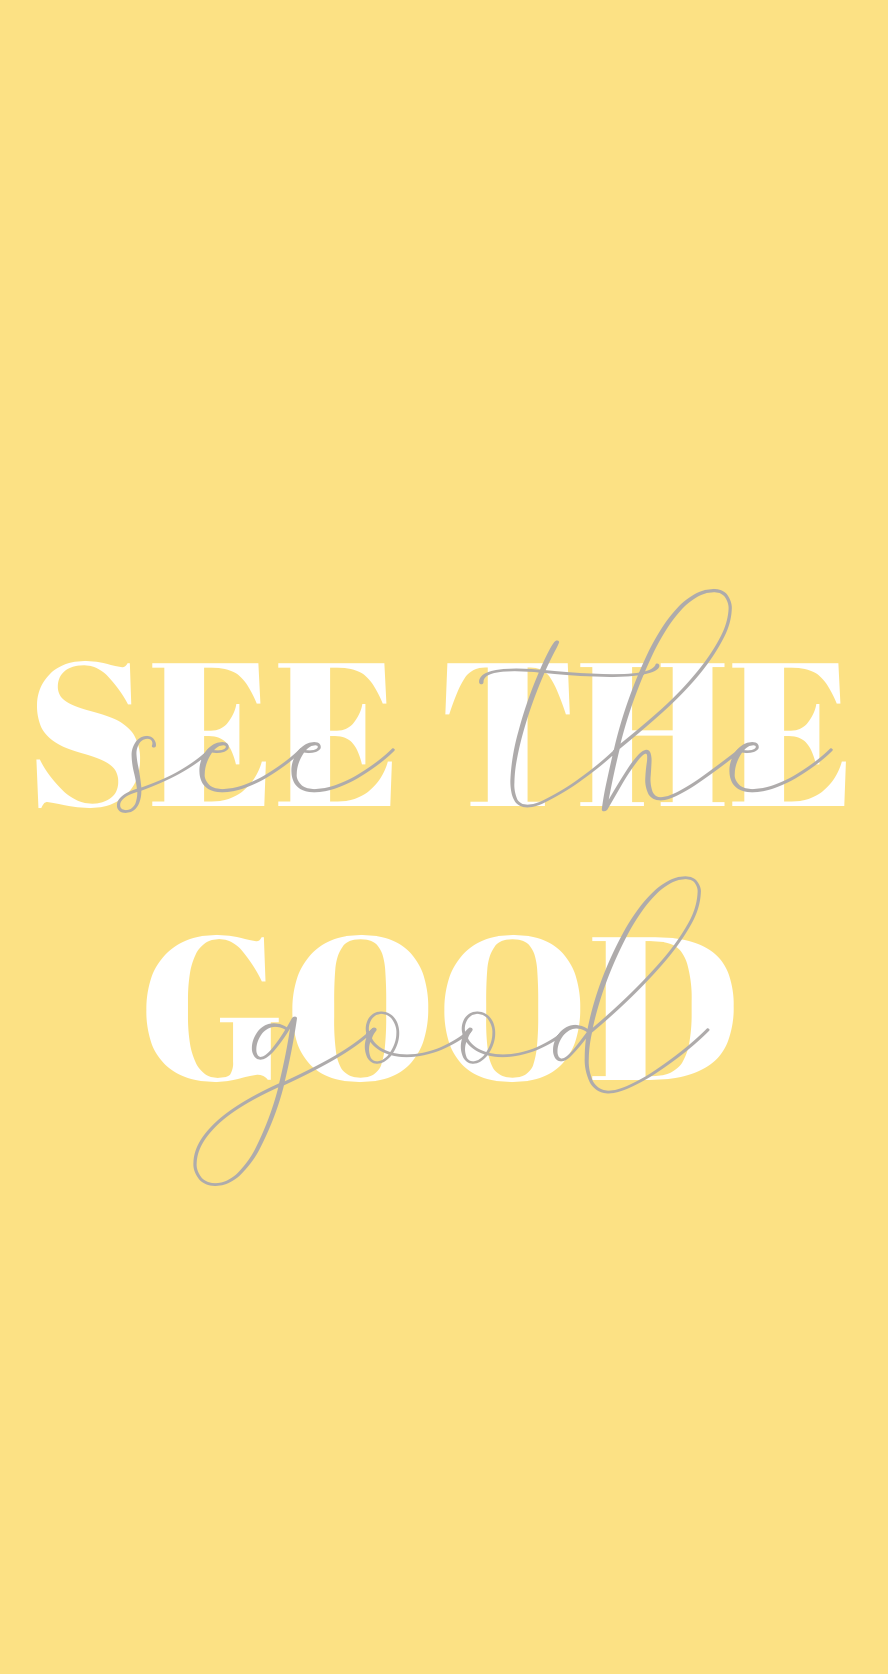 See The Good Yellow Quote Wallpaper iPhone Background